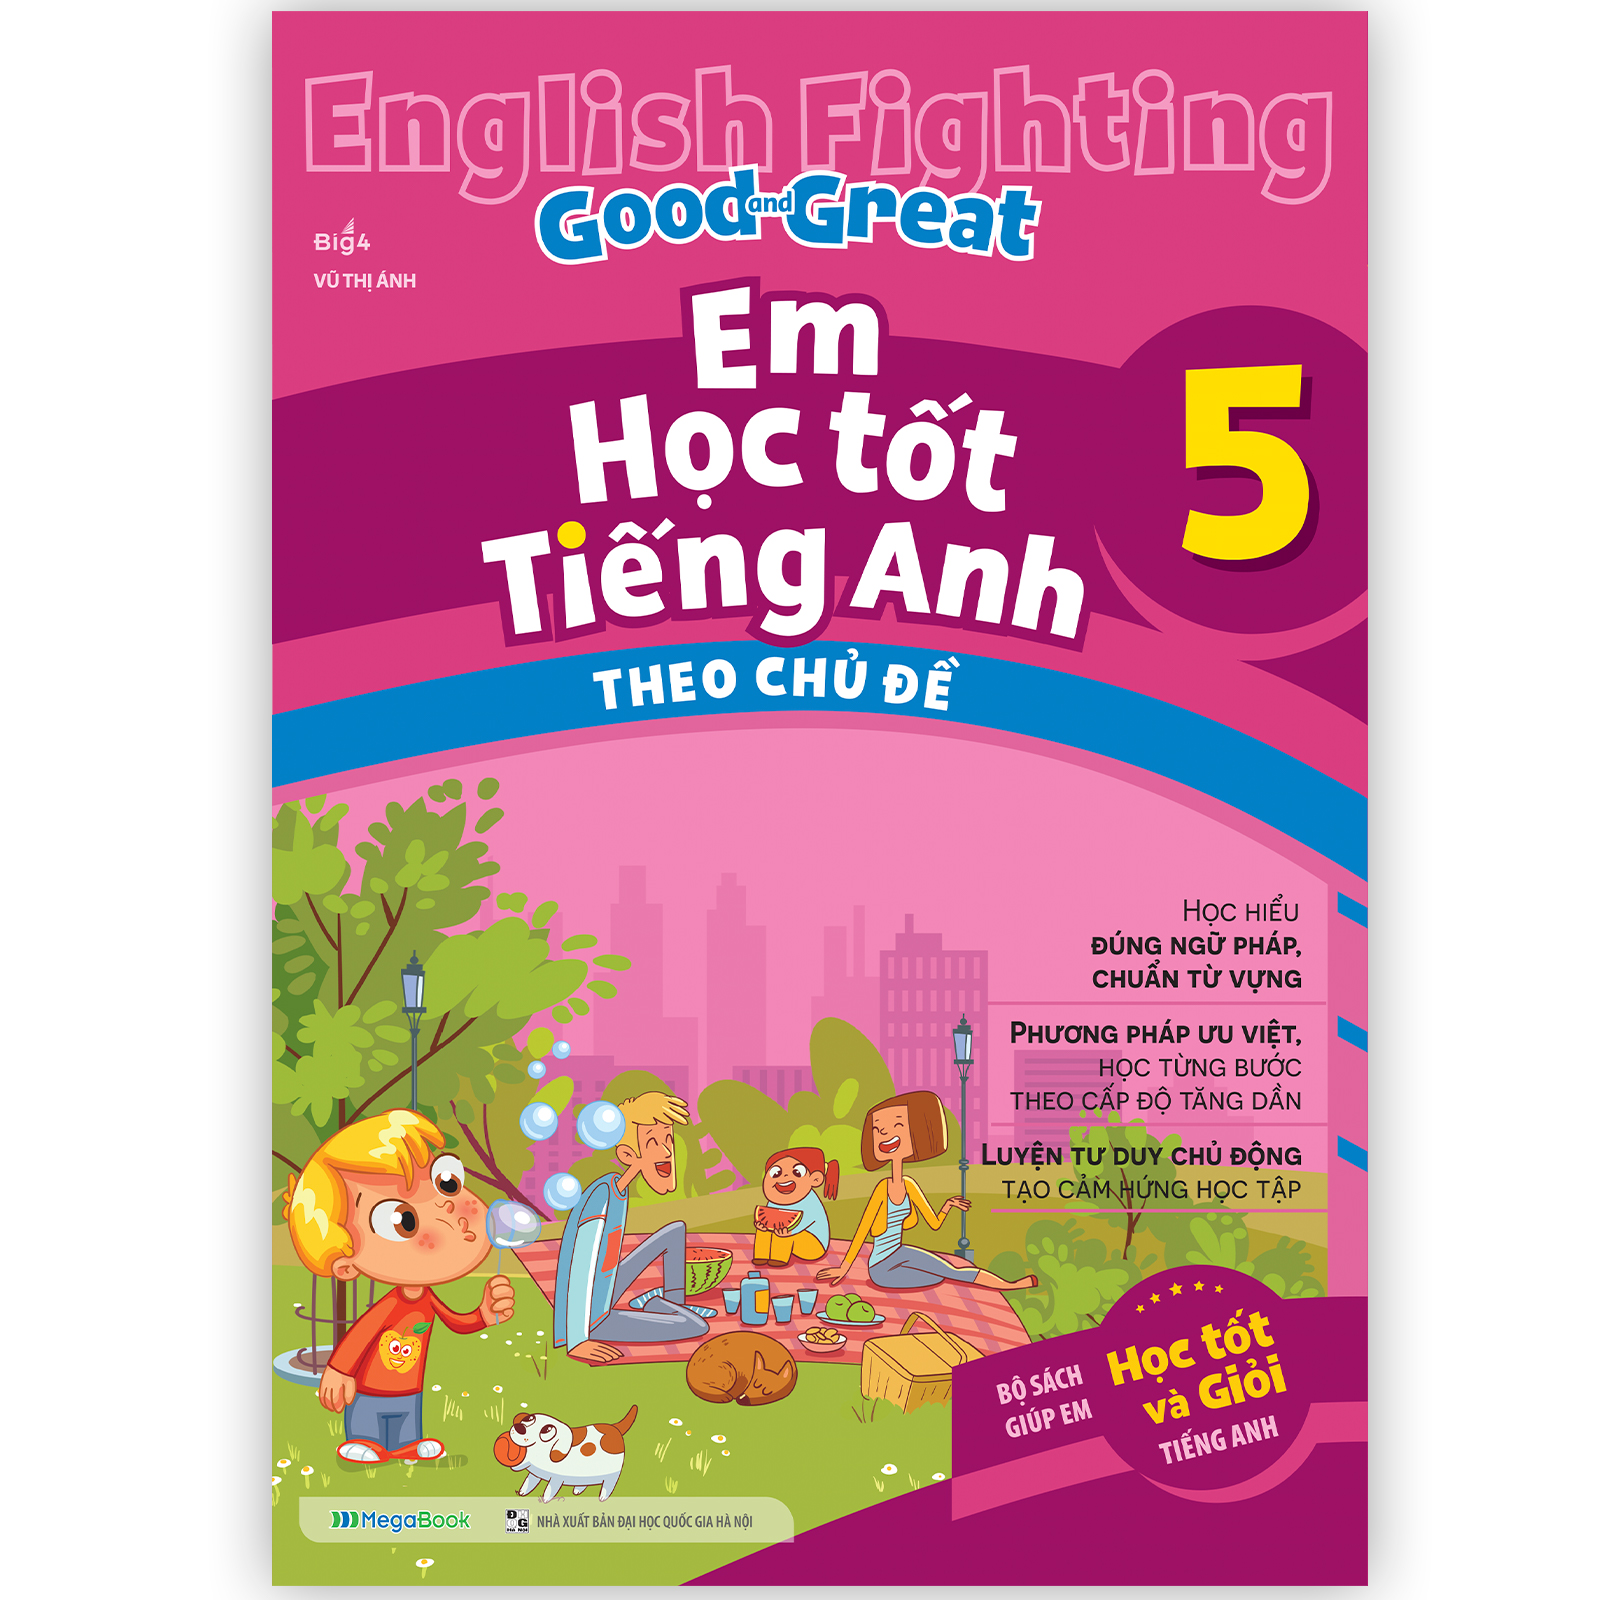 English Fighting Good and Great Em học tốt tiếng Anh theo chủ đề 5